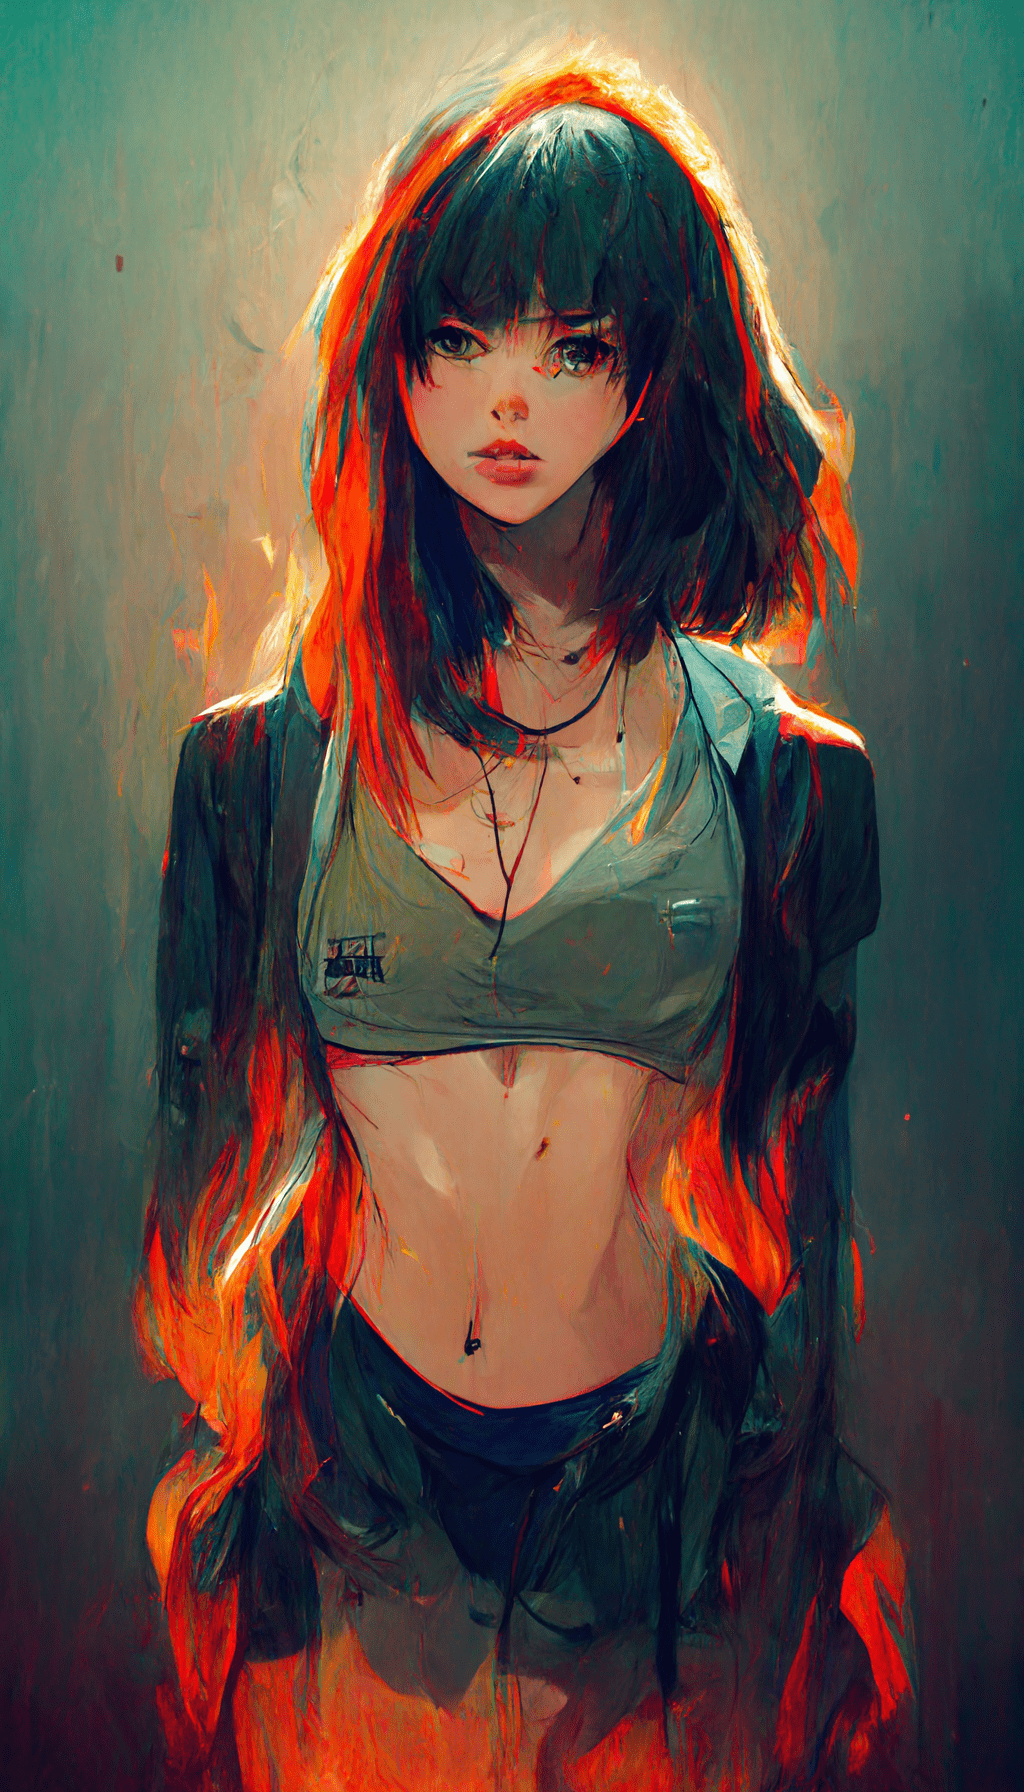 A woman with glowing red hair - Anime girl